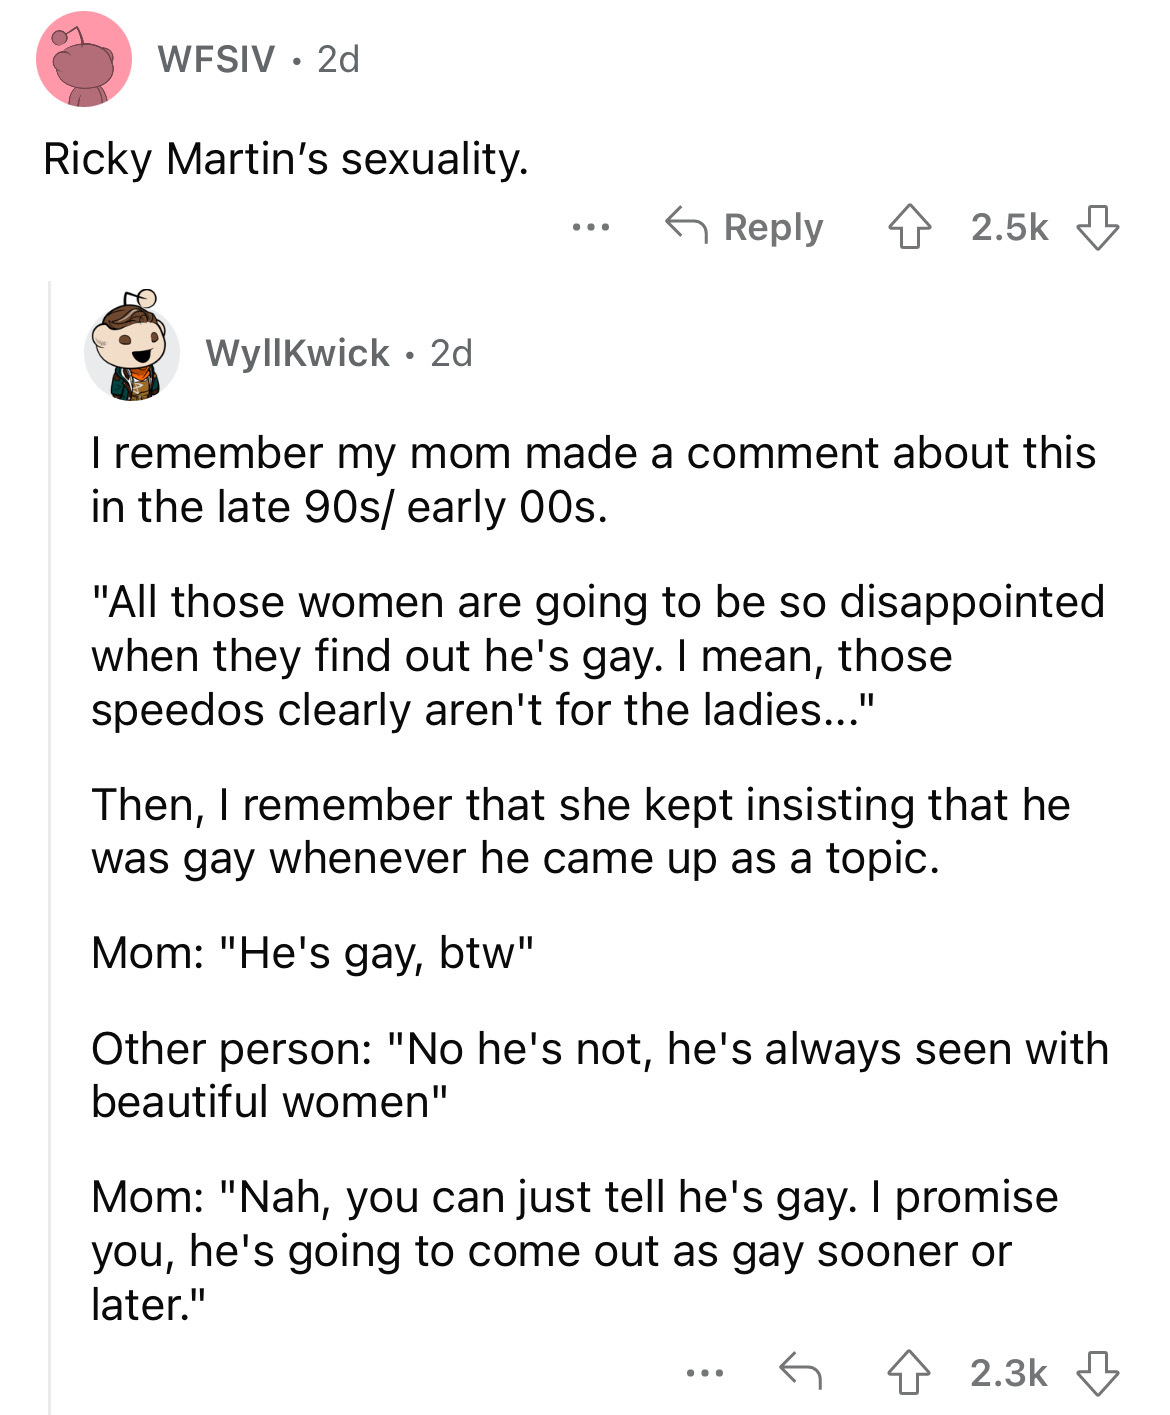 angle - Wfsiv 2d Ricky Martin's sexuality. ... Wyllkwick 2d I remember my mom made a comment about this in the late 90s early 00s. "All those women are going to be so disappointed when they find out he's gay. I mean, those speedos clearly aren't for the l